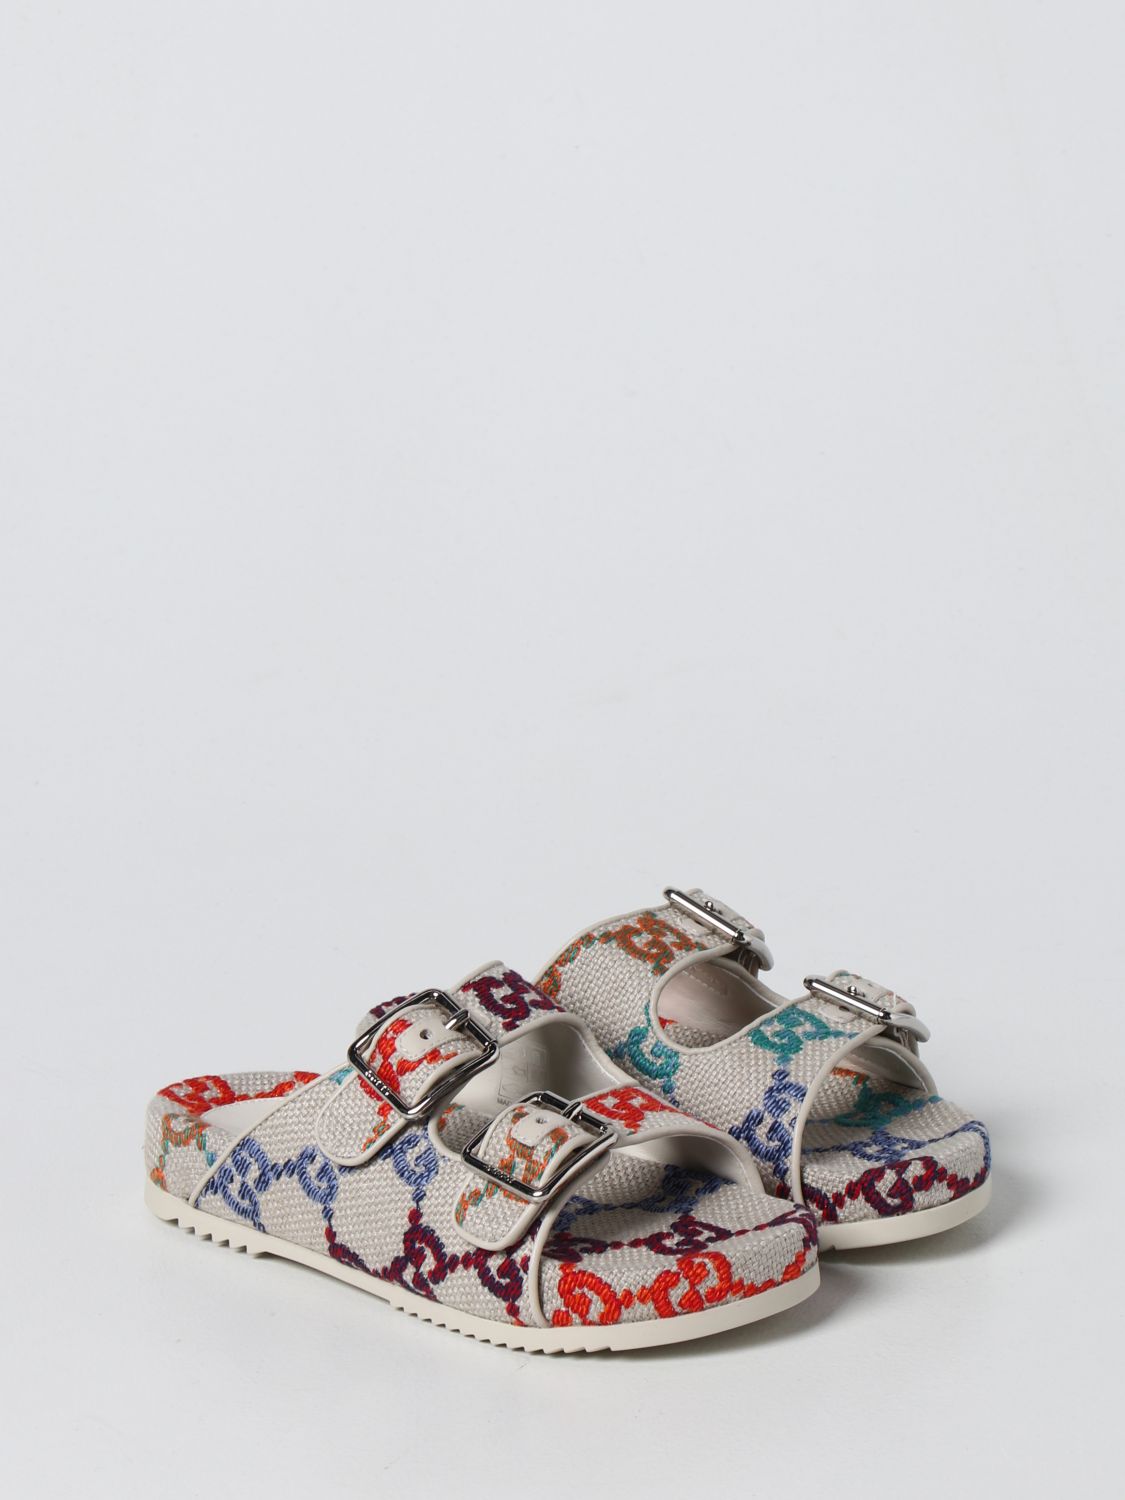 Chaussures Gucci: Chaussures Gucci fille multicolore 2